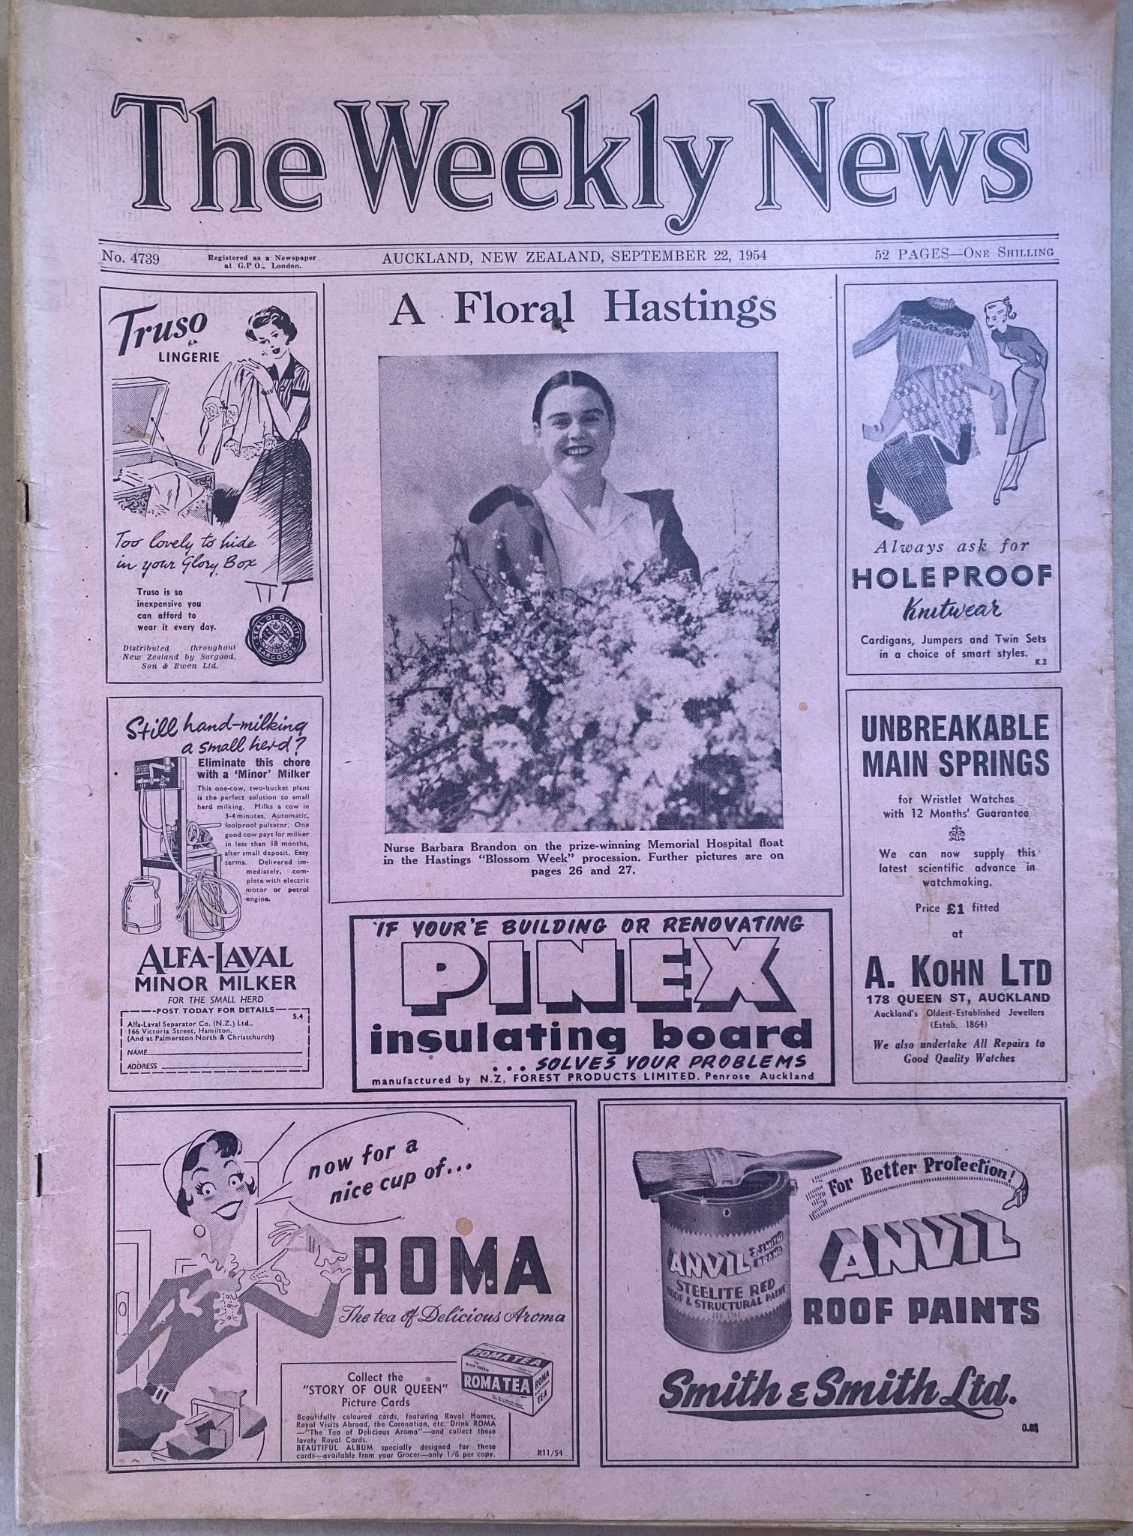 OLD NEWSPAPER: The Weekly News - No. 4739, 22 September 1954